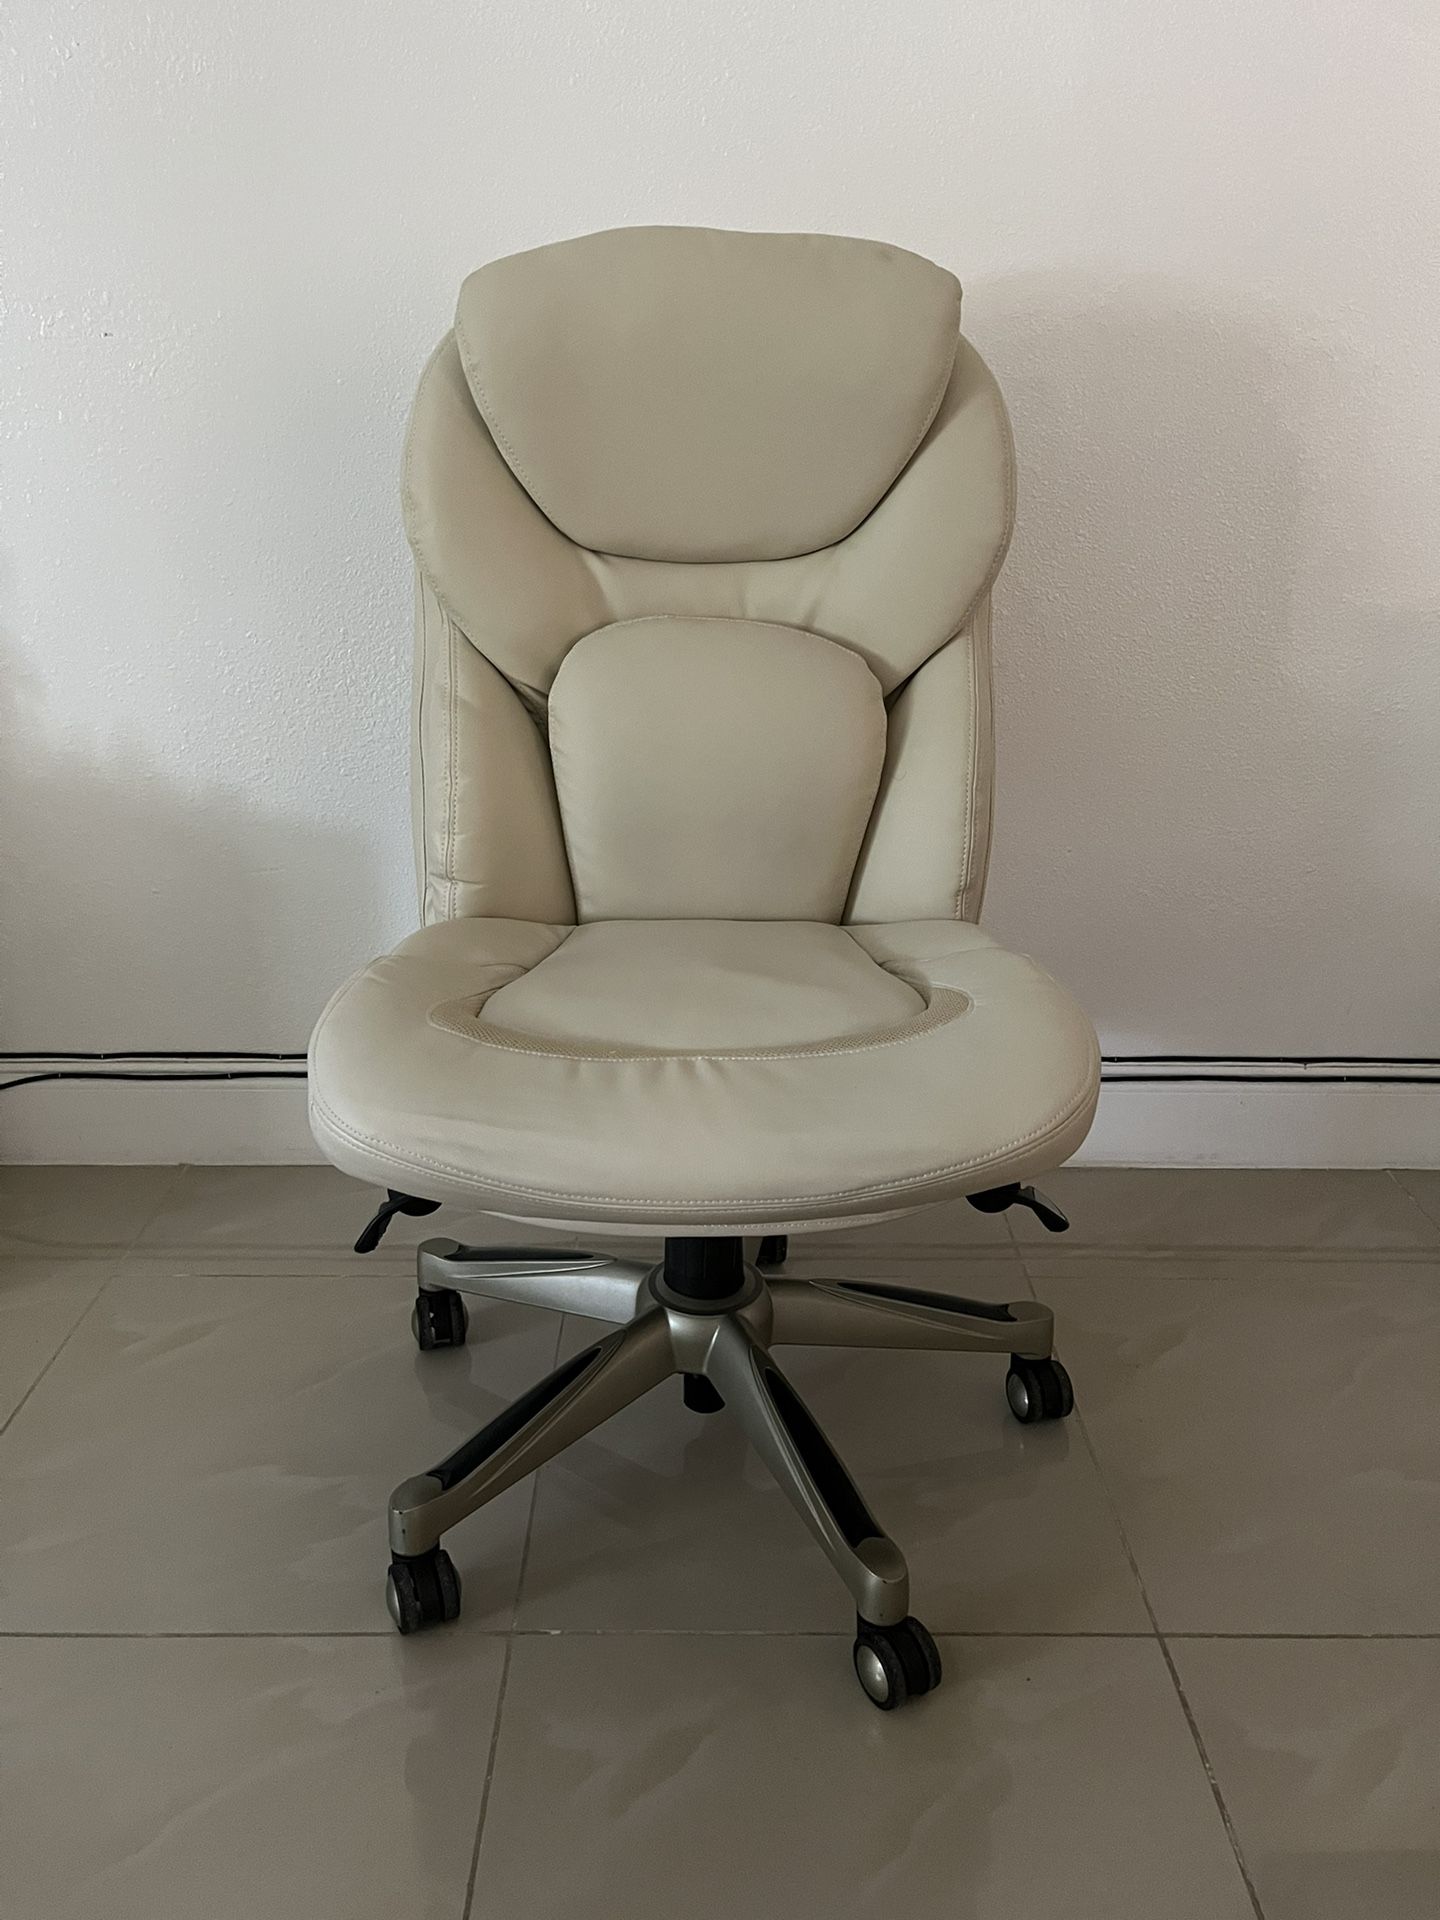 Office Chair In Excellent Condition $100 